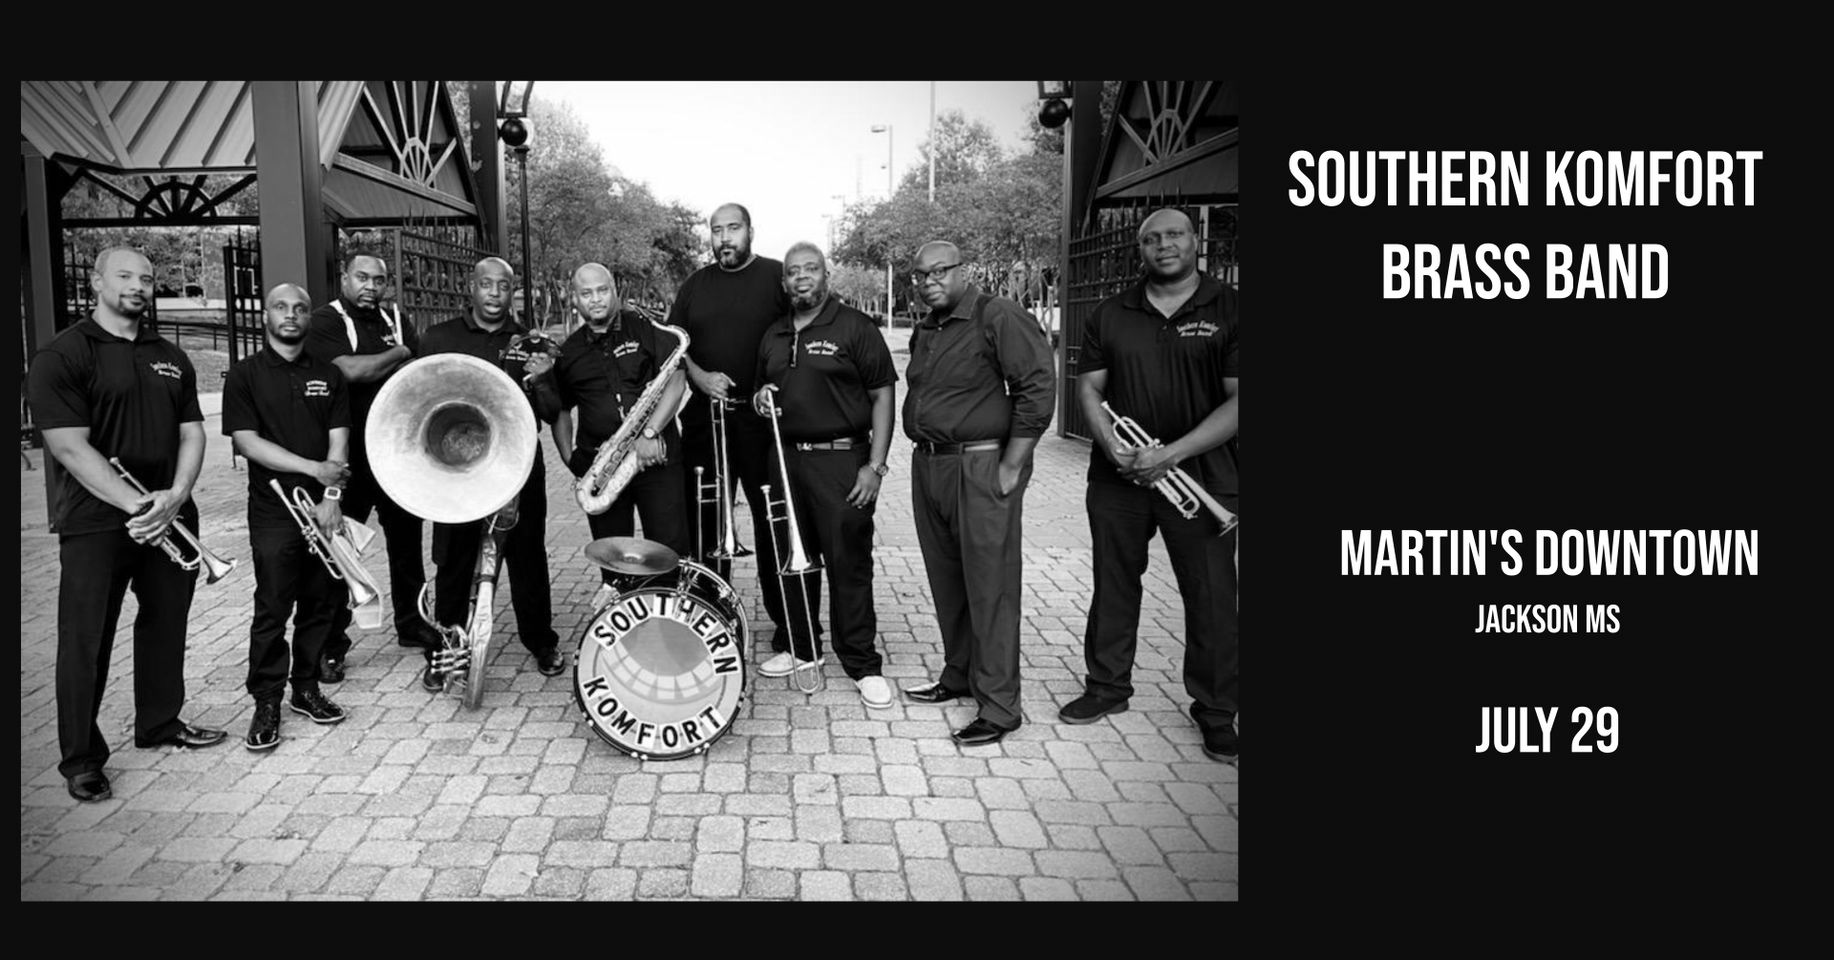 Southern Komfort Brass Band Live at Martin’s Downtown